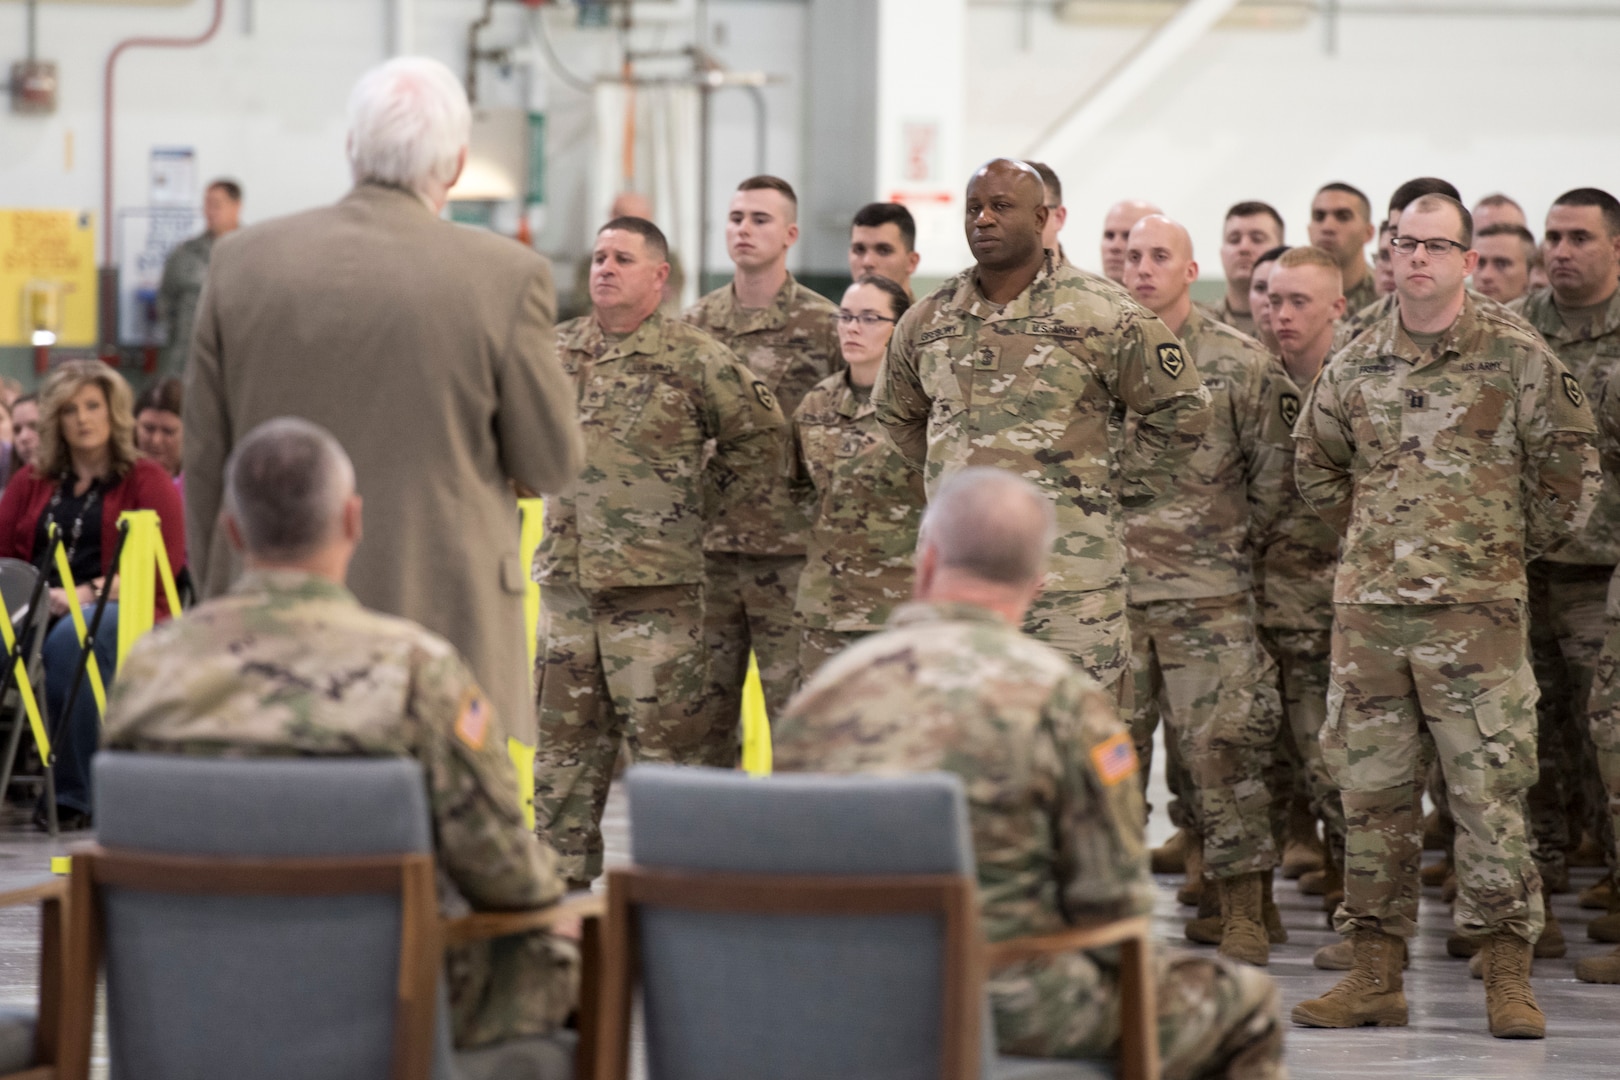 Mike Hall, Chief of Staff for Governor Jim Justice, addresses Soldiers of the 157th Military Police Company during a deployment ceremony held Dec. 3, 2019, at the 167th Airlift Wing in Martinsburg, W.Va. More than 160 Soldiers will be deploying to Guantanamo Bay for nearly a year to support U.S. Southern Command’s high-risk detention operations. (U.S. Air National Guard photo by Senior Master Sgt. Emily Beightol-Deyerle)